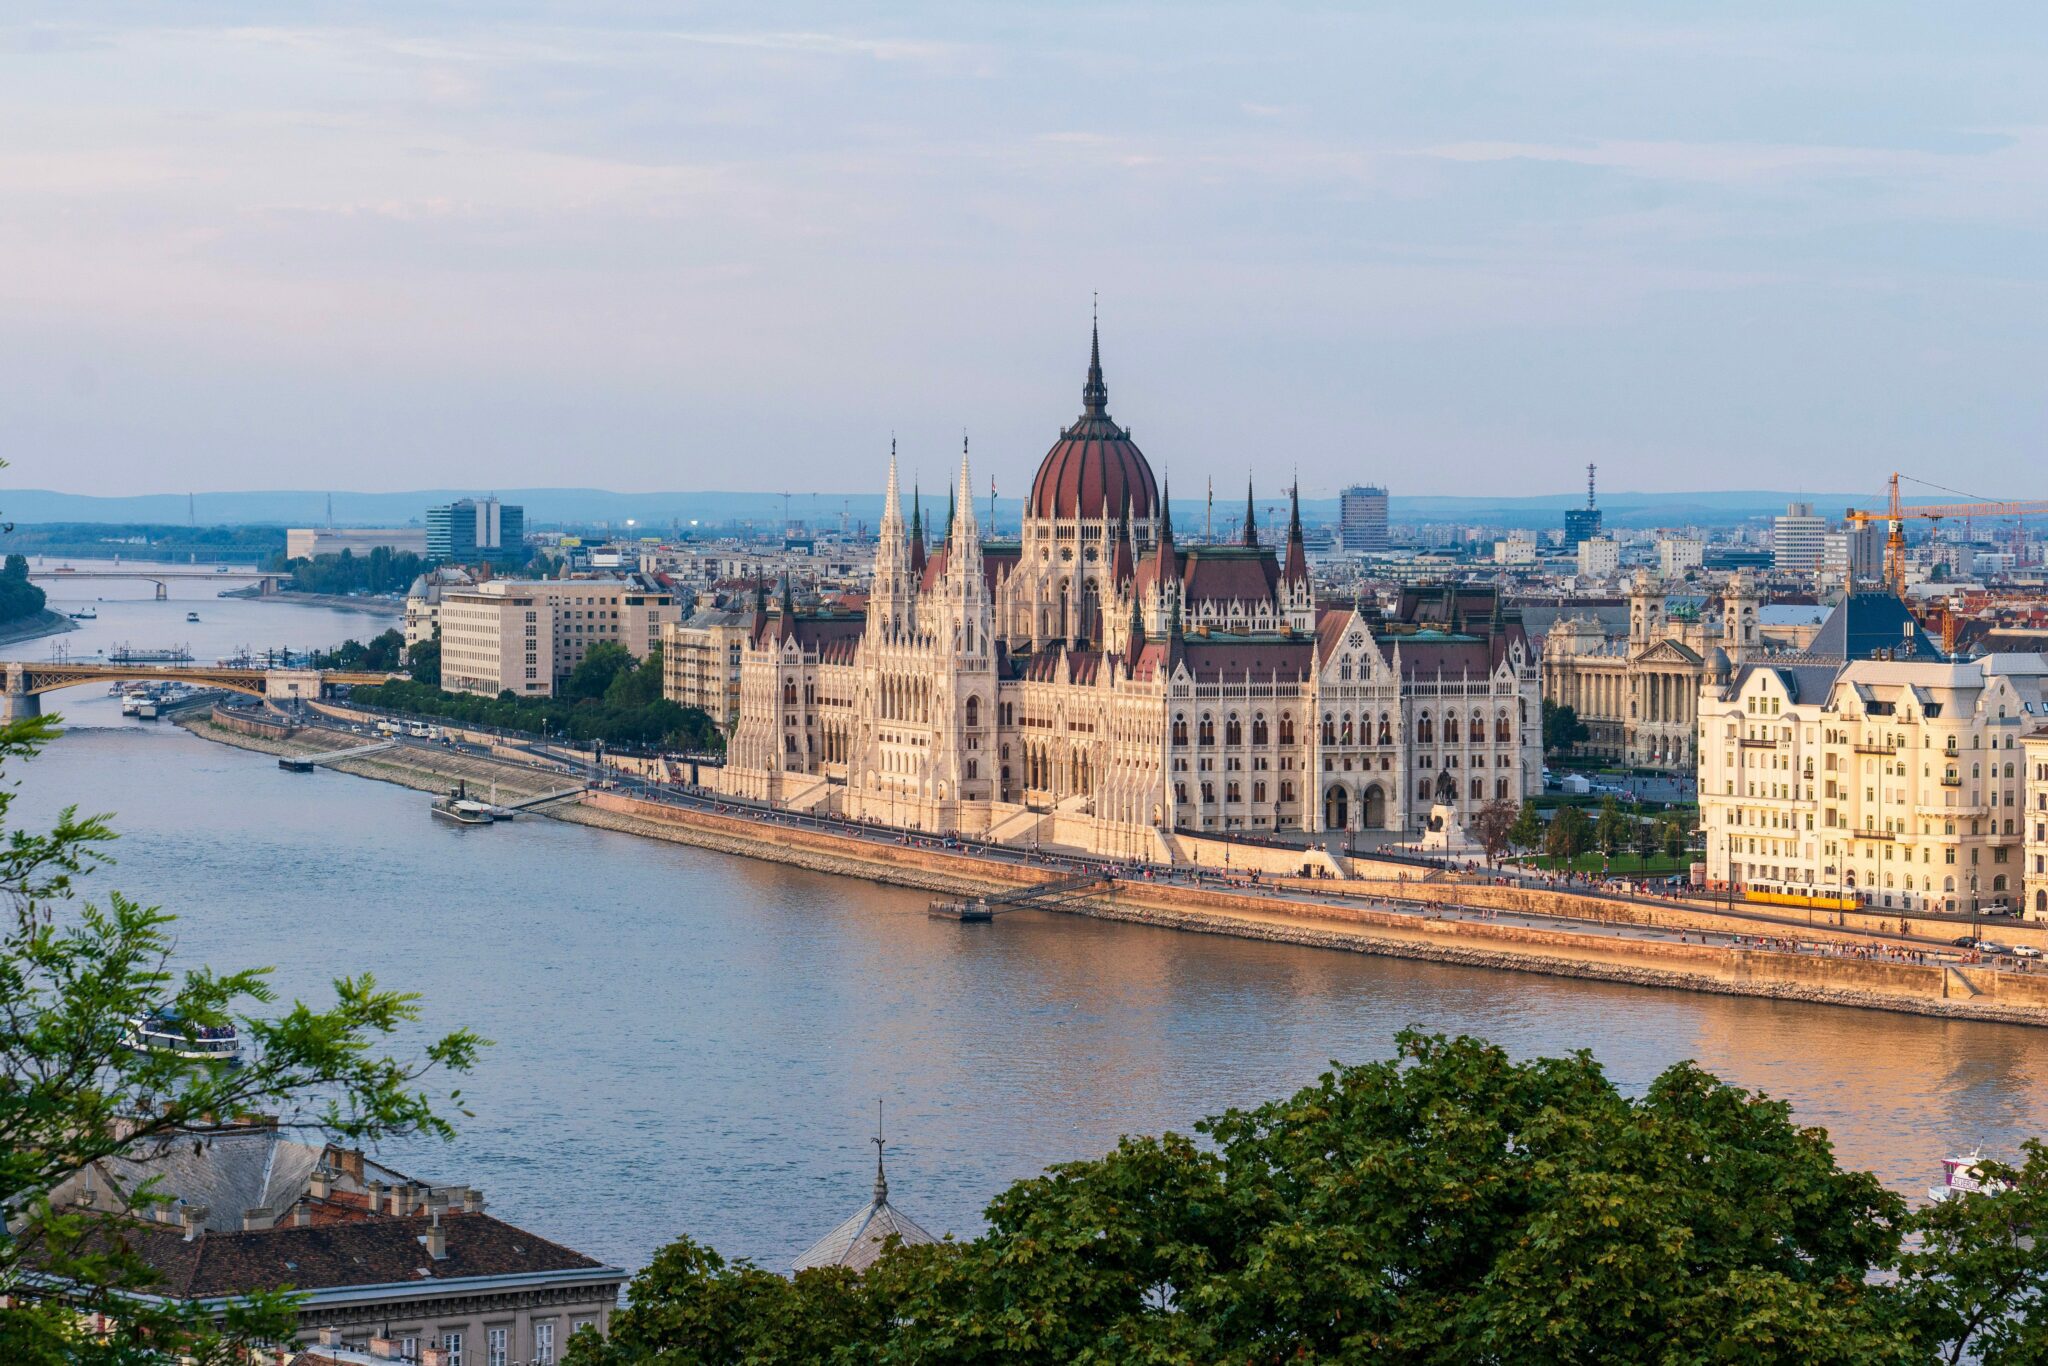 Image of the Parliament building in Budapest next to the river